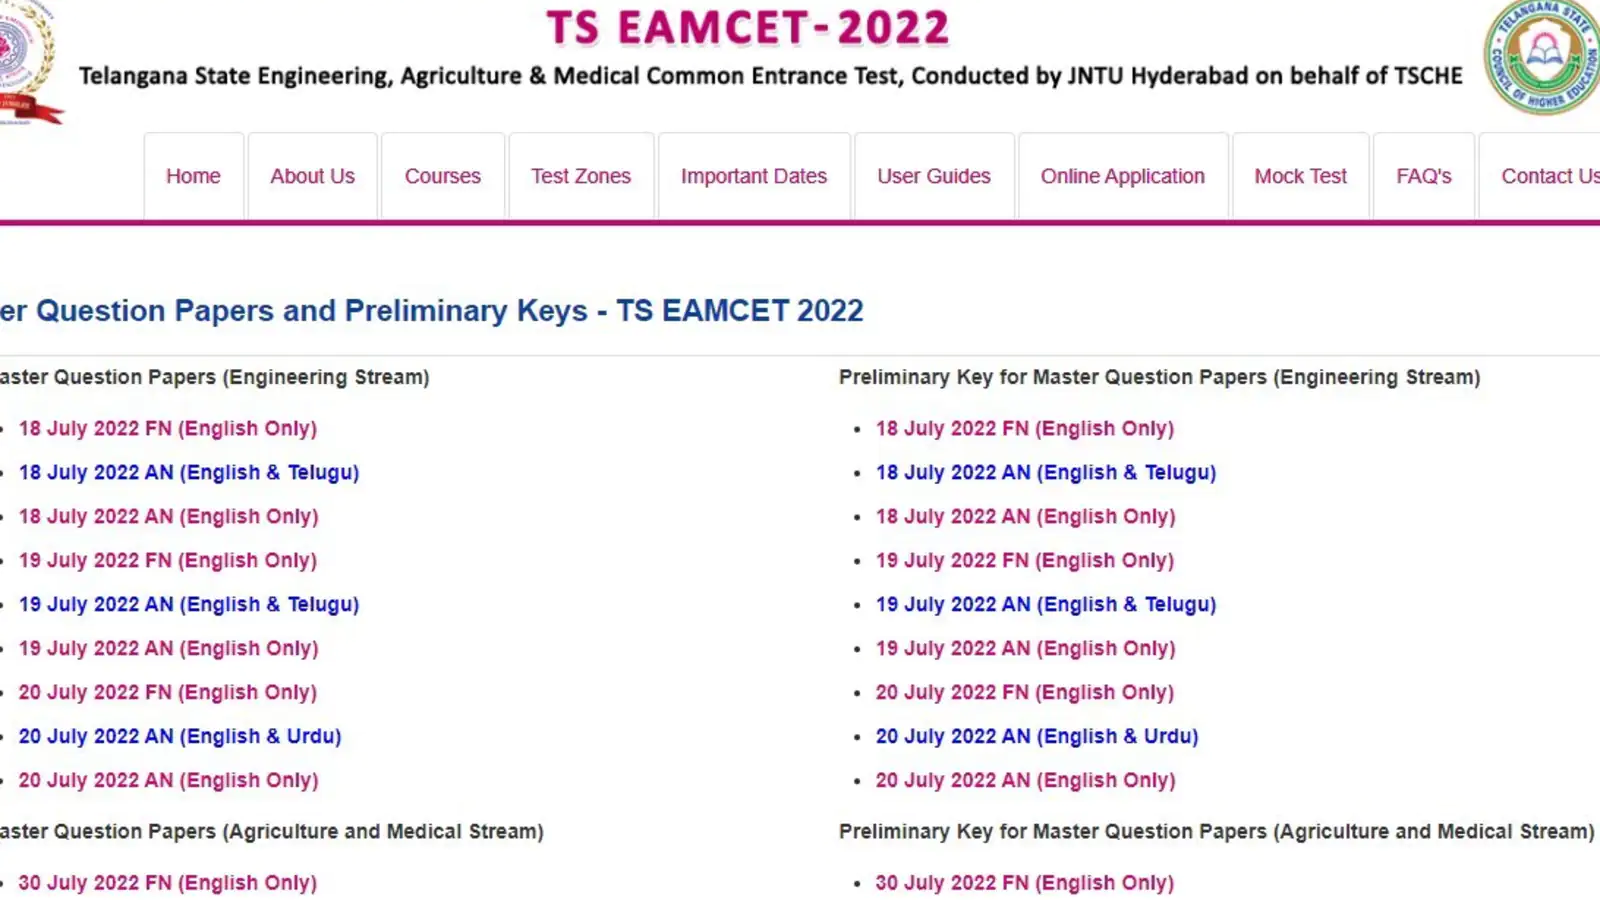 TS EAMCET answer key for Agriculture & Medical stream out on eamcet.tsche.ac.in | Competitive Exams